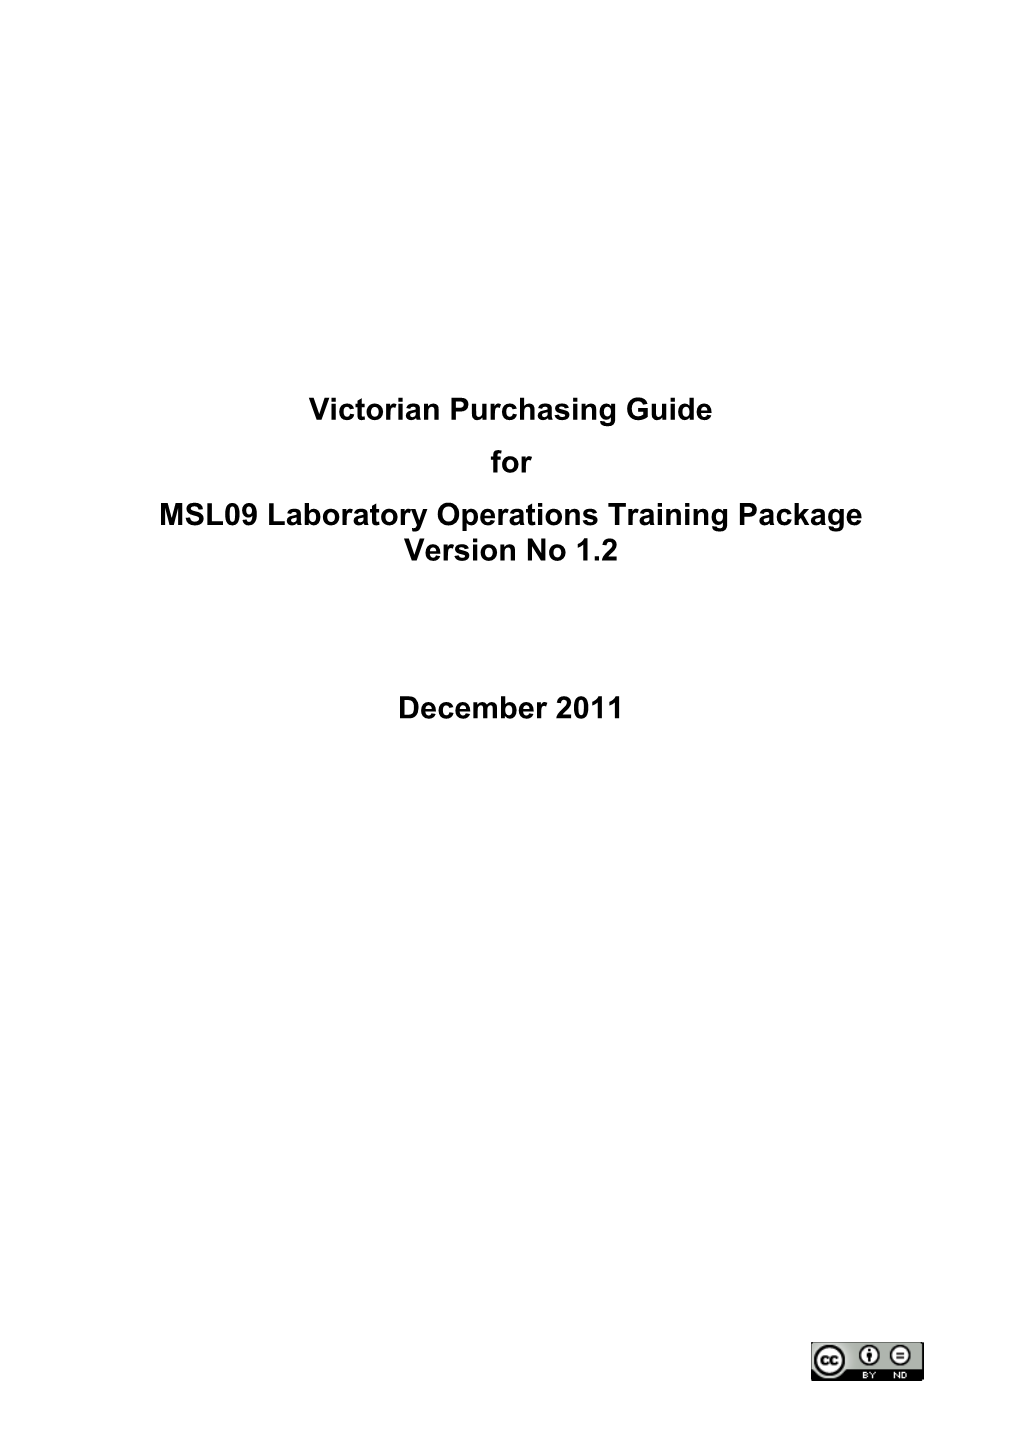 Victorian Purchasing Guide for MSL09 Laboratory Operations Version 1.2